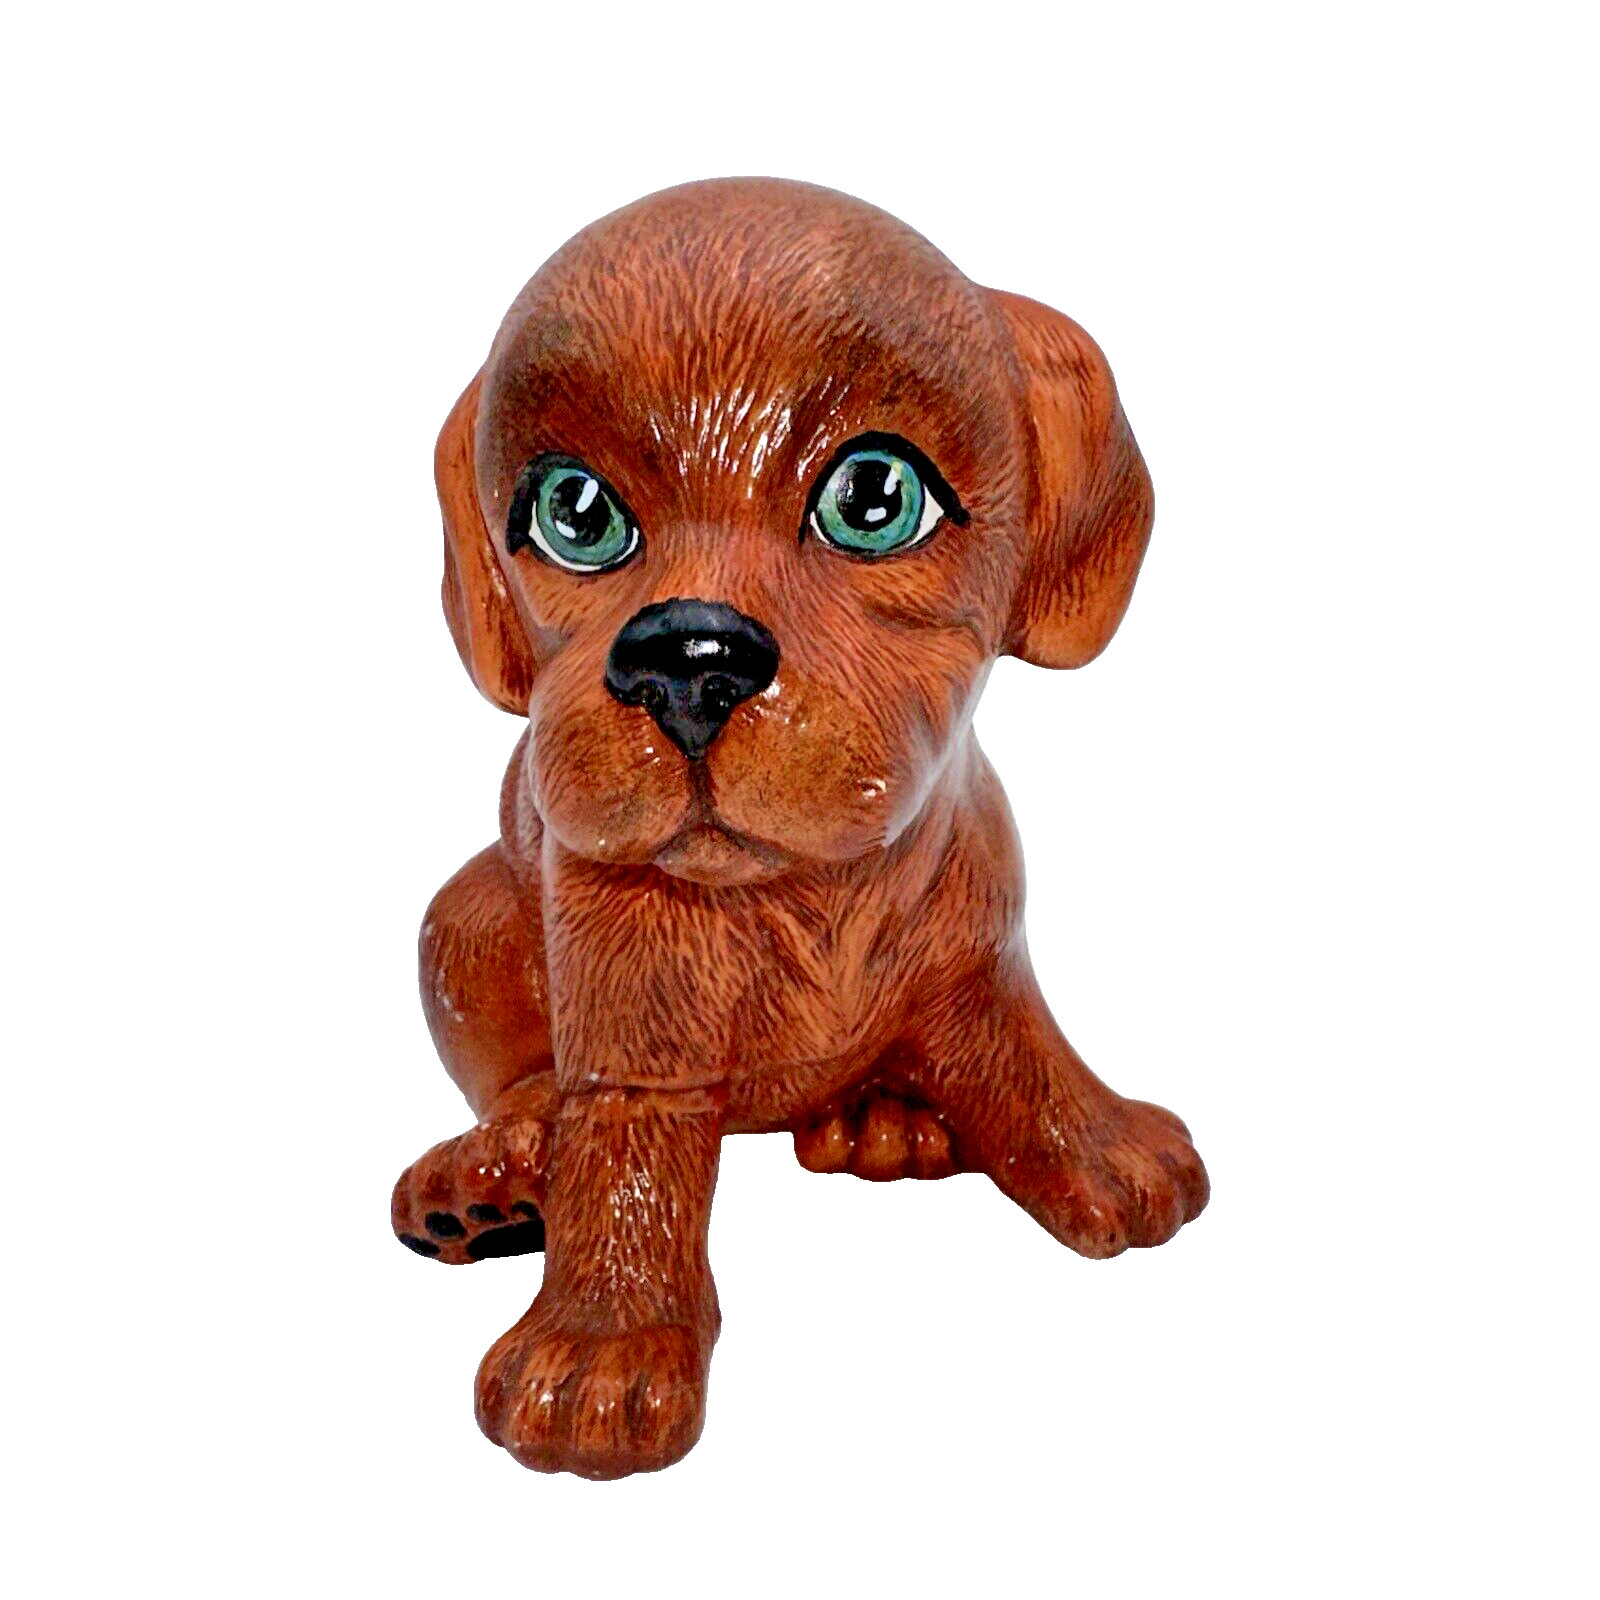 VTG Kitschy Brown Pup Dog Figurine With Green Eyes 1986 5.5” Signed SC107